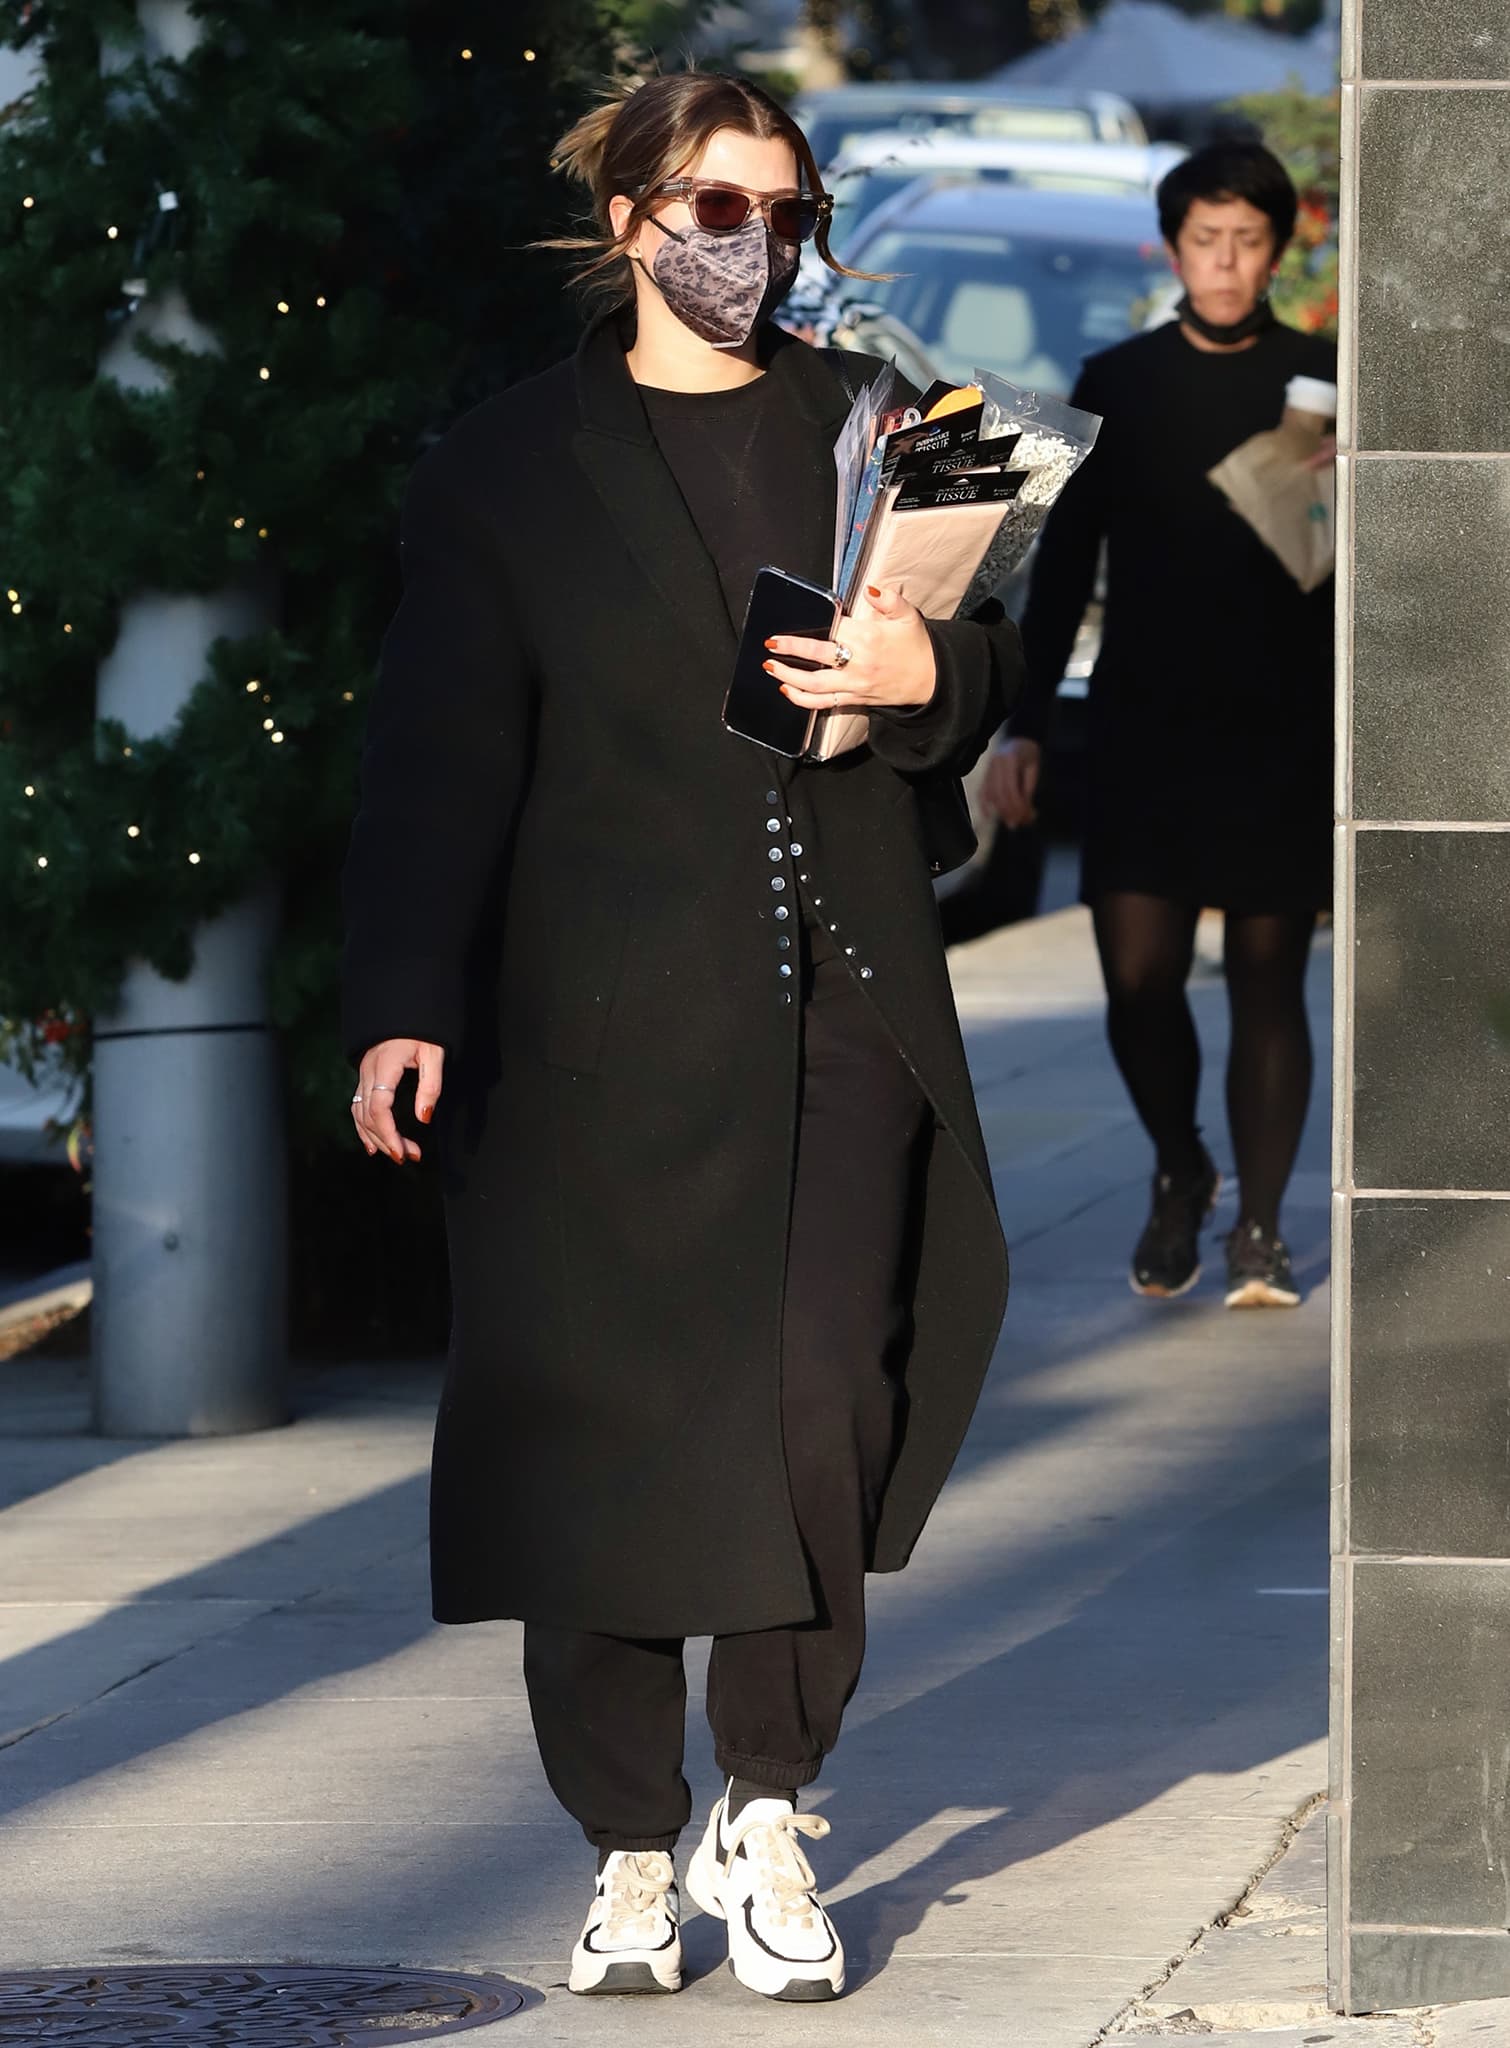 Sofia Richie shows how to elevate comfy sweat pants and sneakers with a trench coat